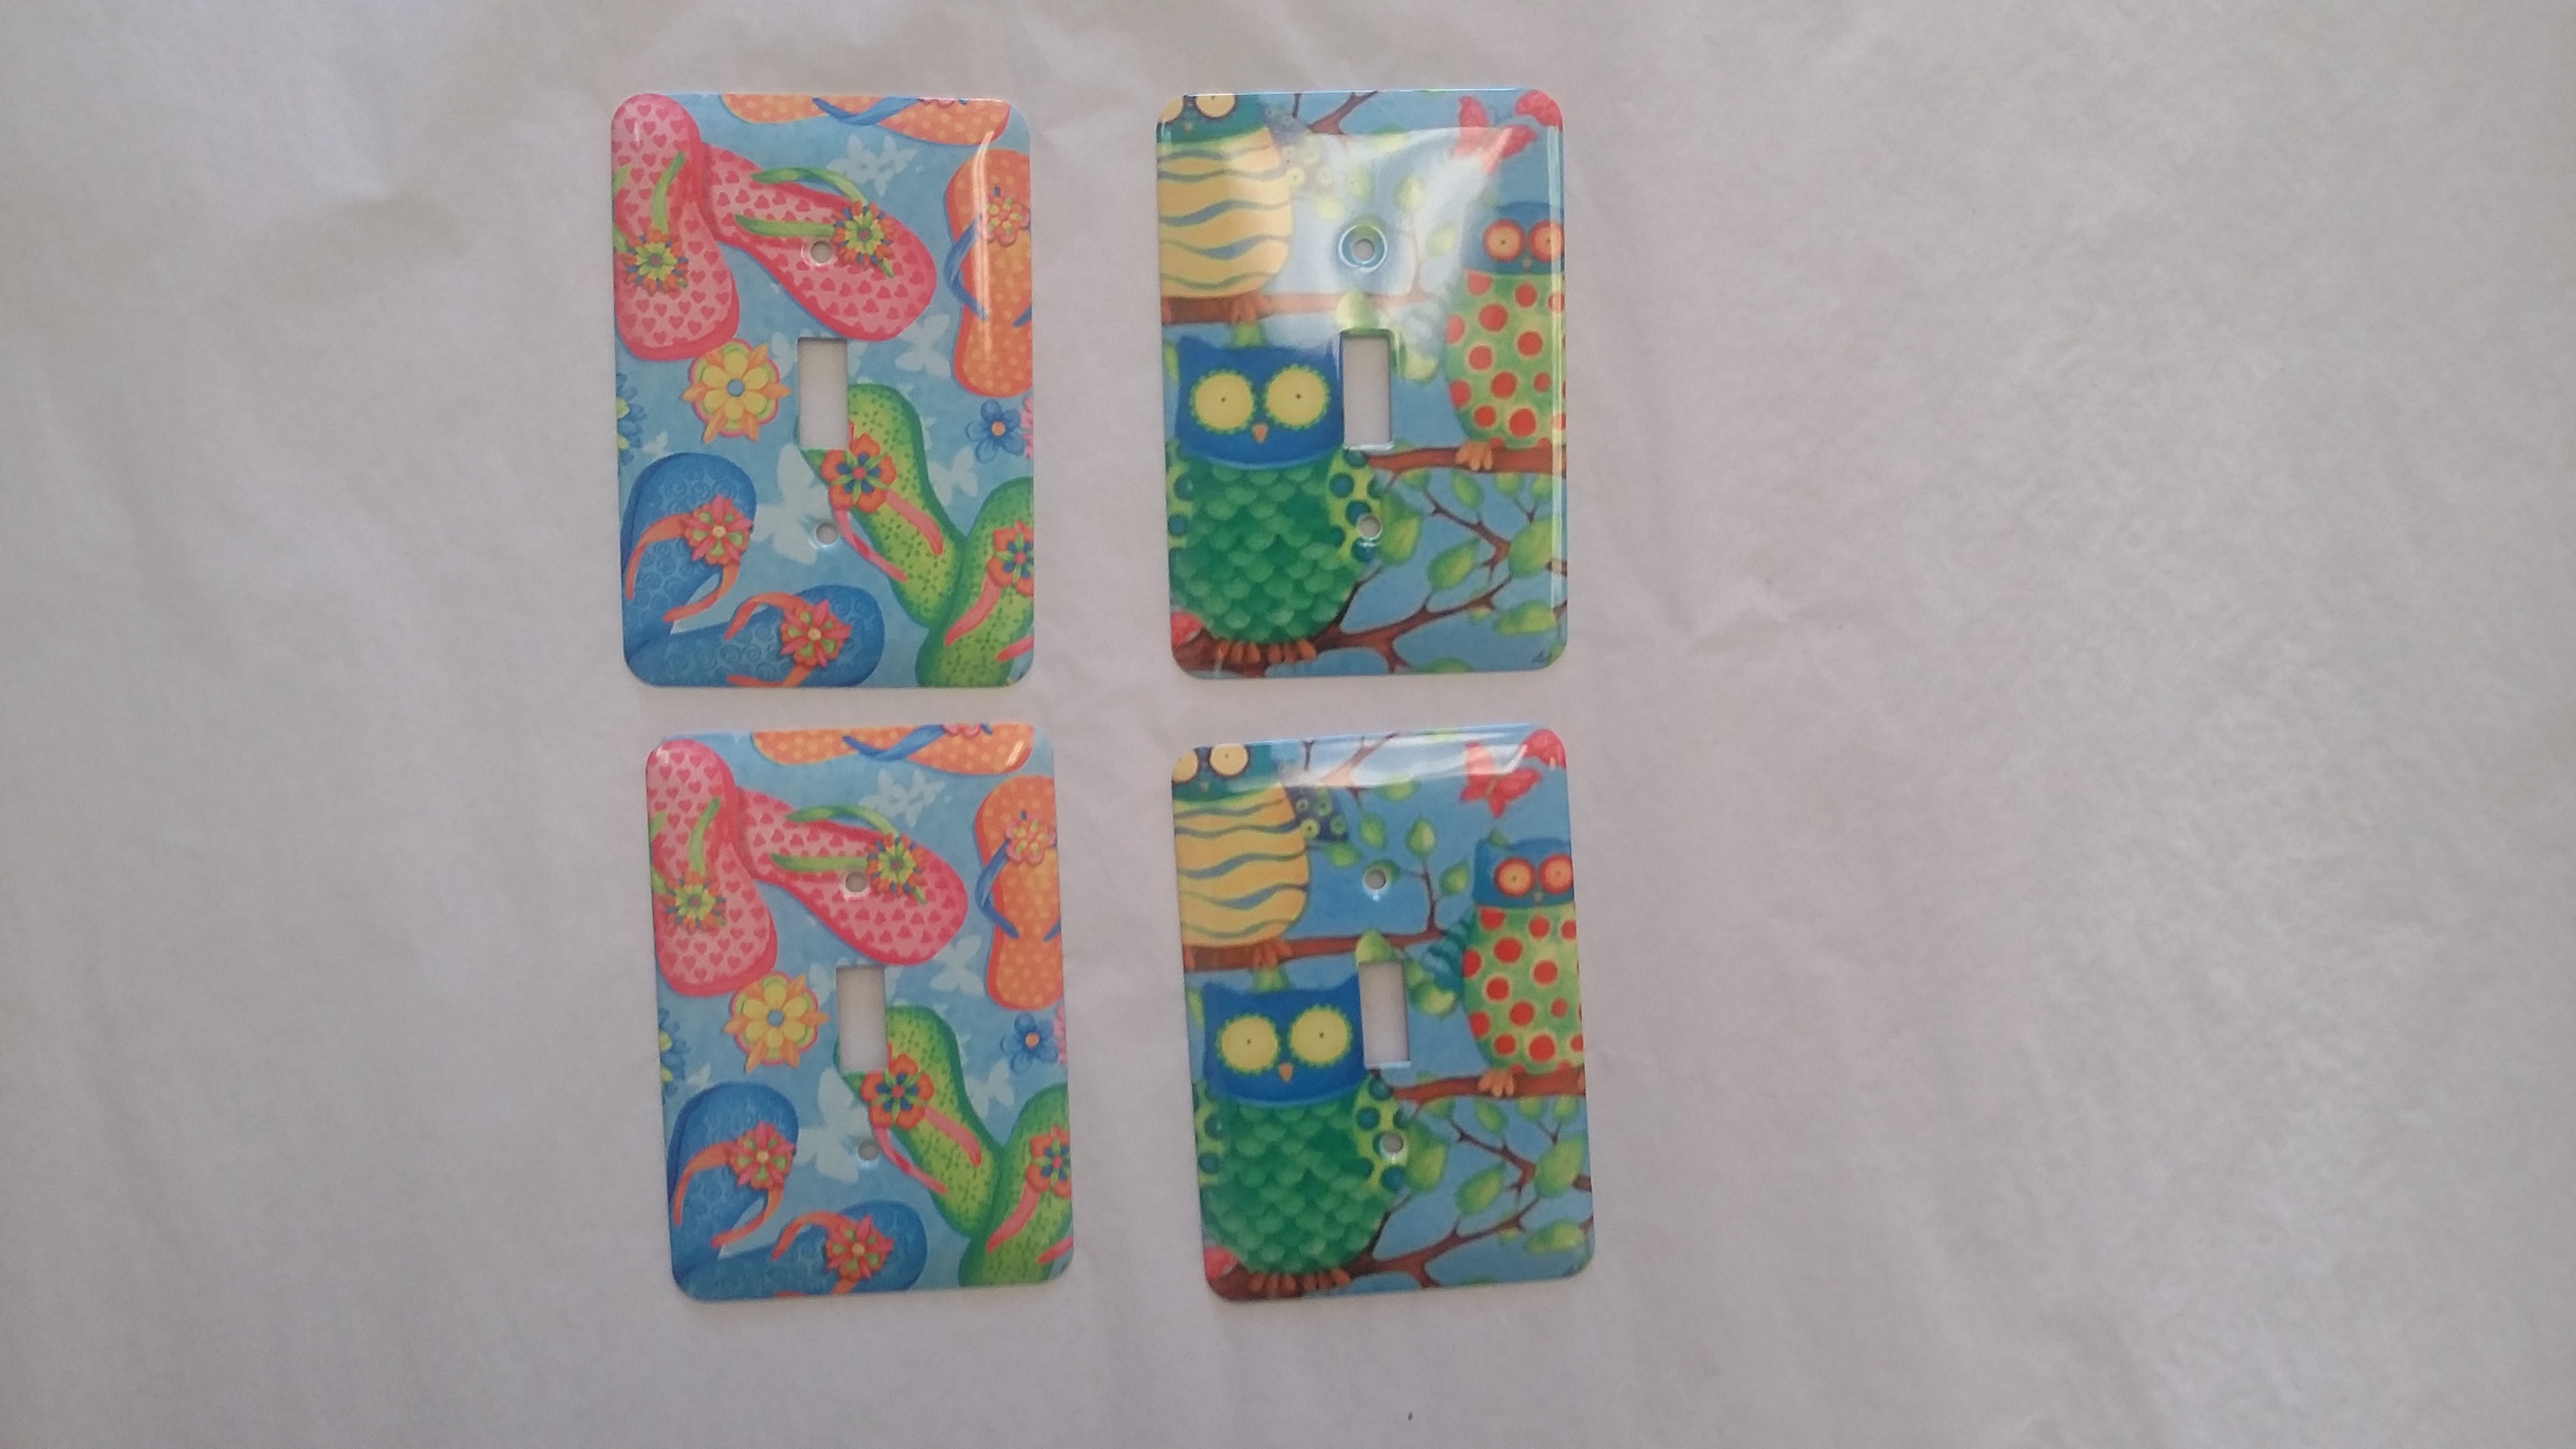 light switches made with sublimation printing